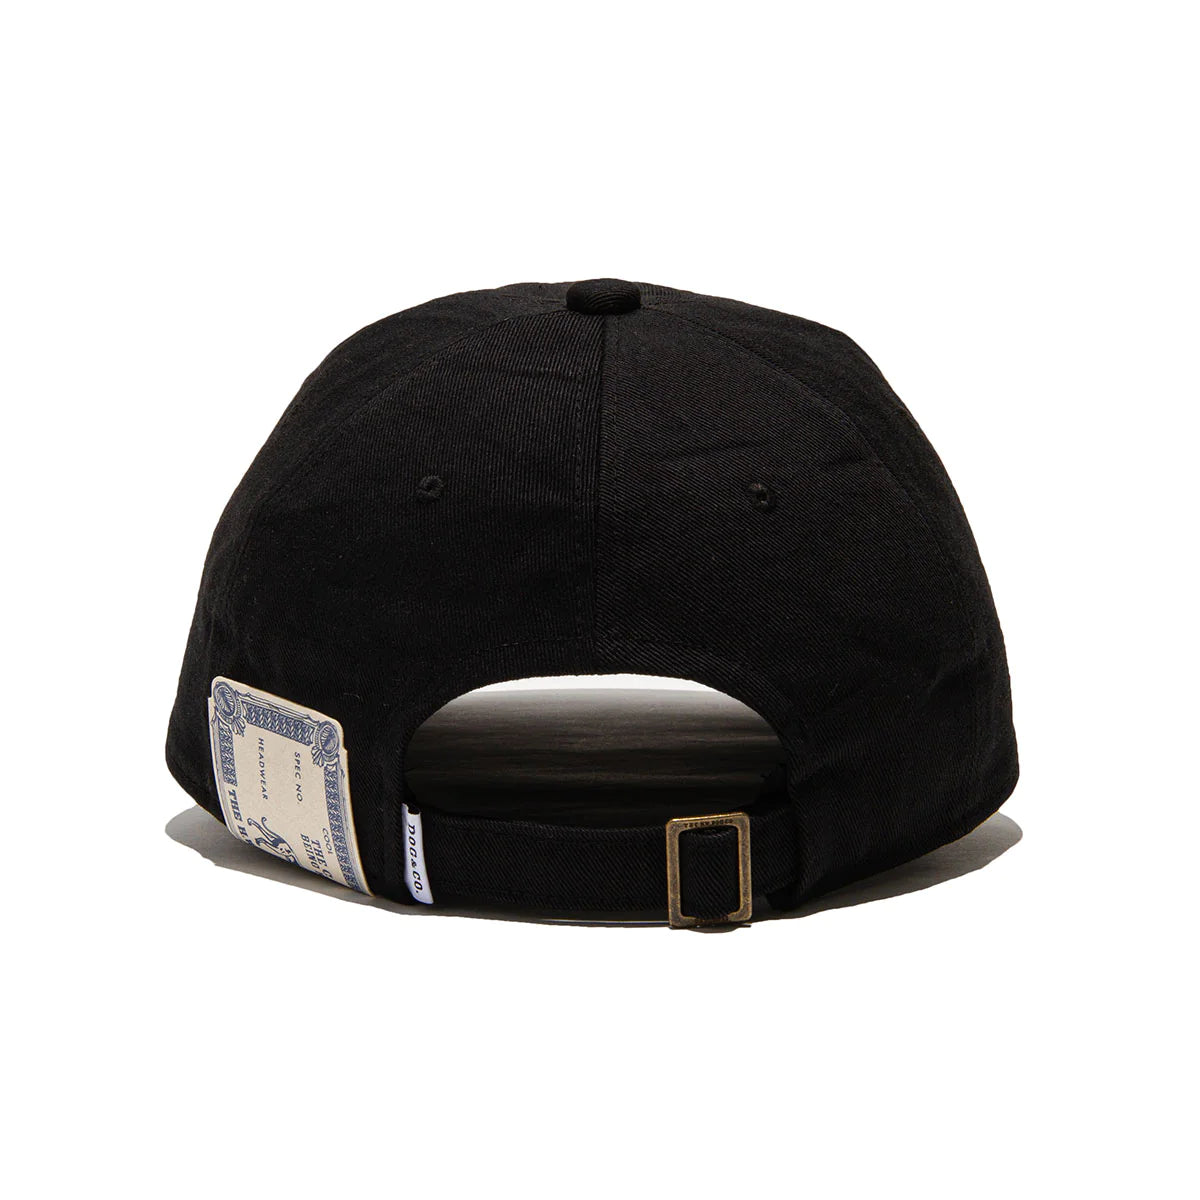 The H.W. Dog & Co - THW EMBROIDERY BBCAP - Black